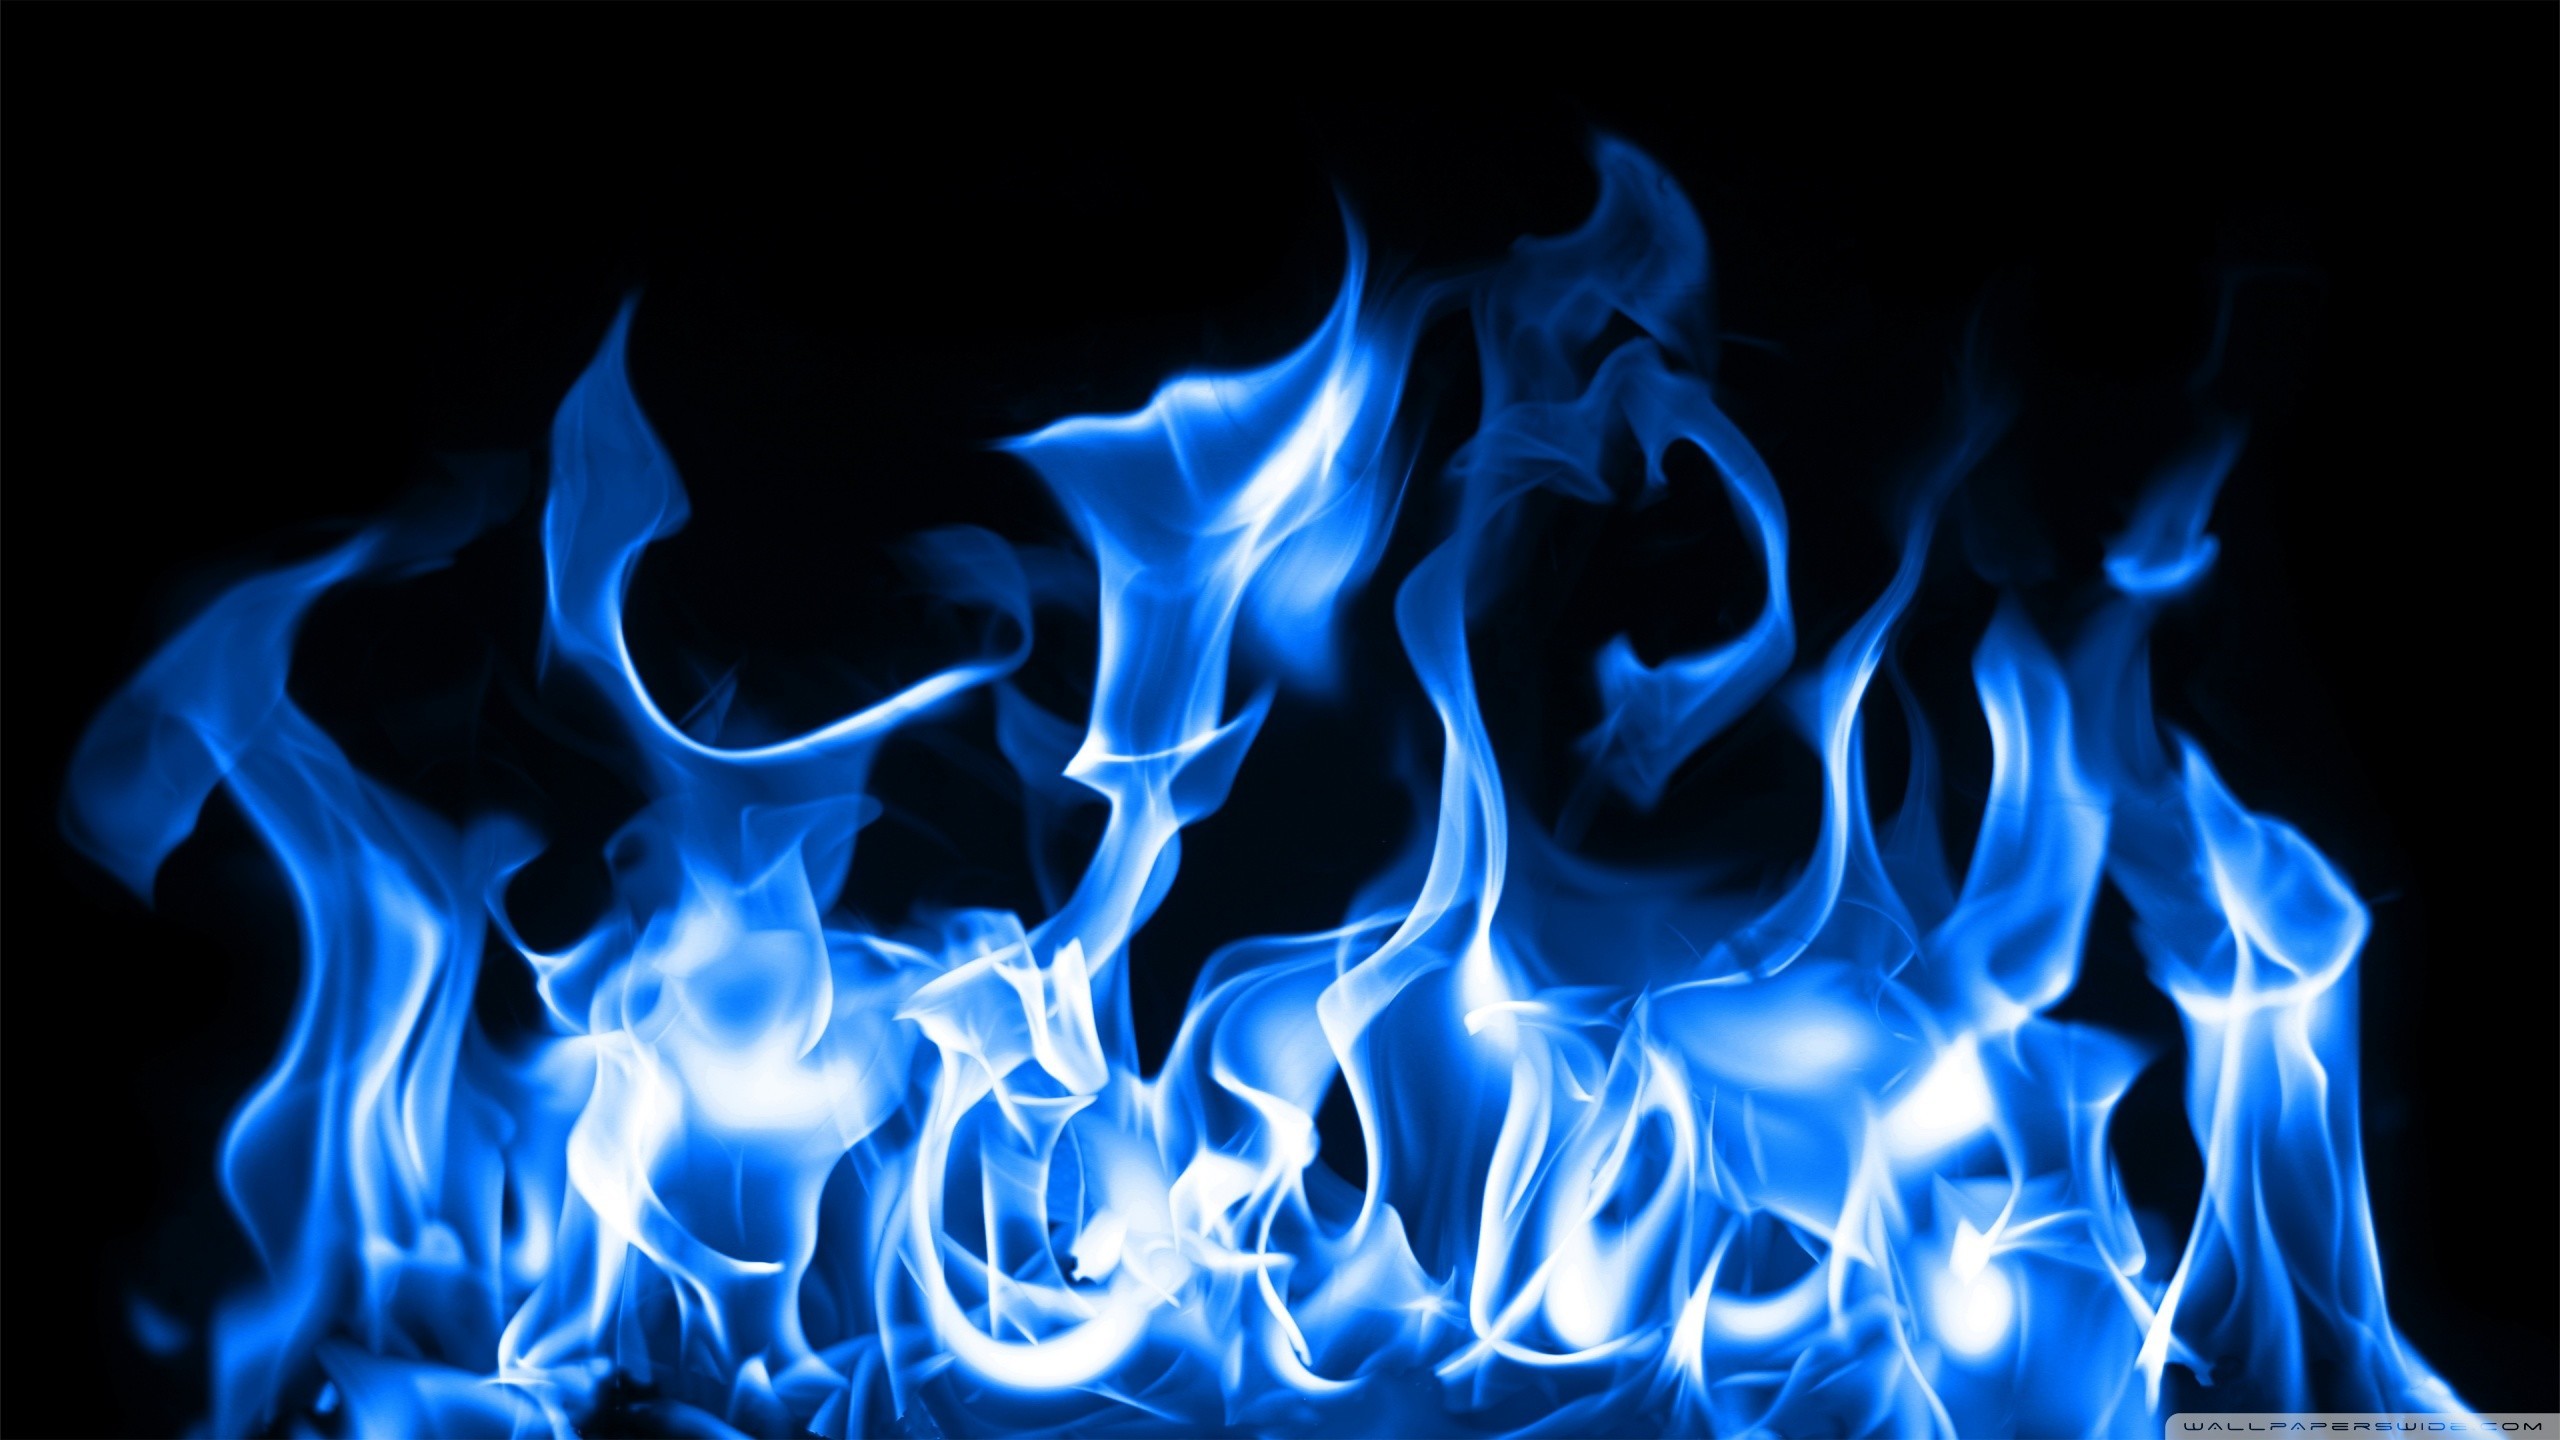 2560x1440 1920x1200 Most Downloaded Blue Fire Wallpapers - Full HD wallpaper search